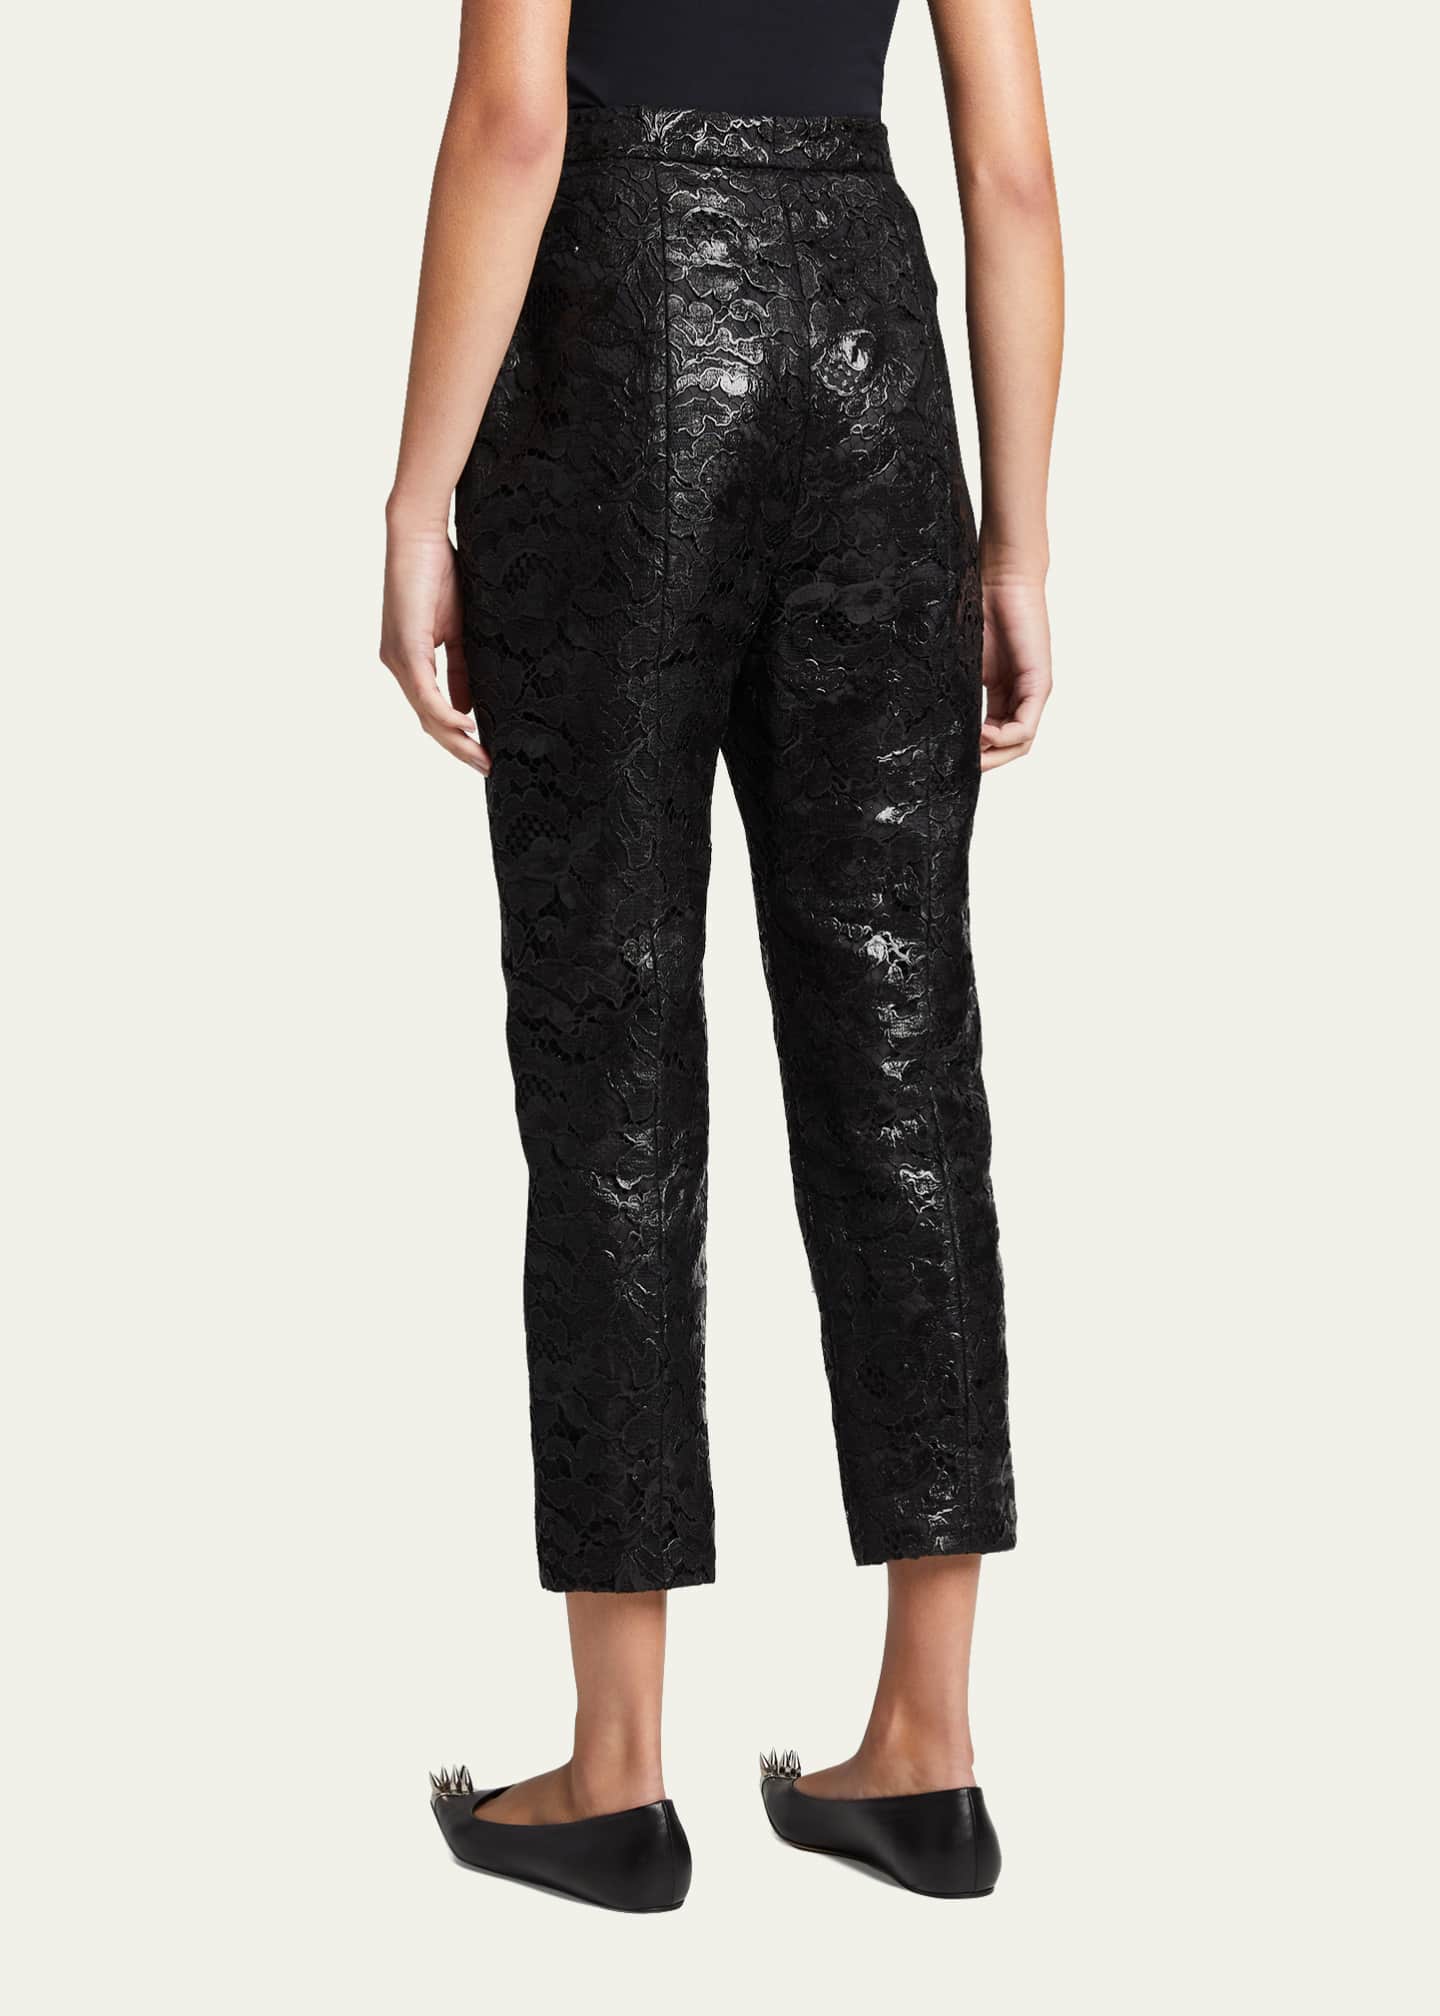 Alexander McQueen Lacquered Lace High Slim Pants - Bergdorf Goodman